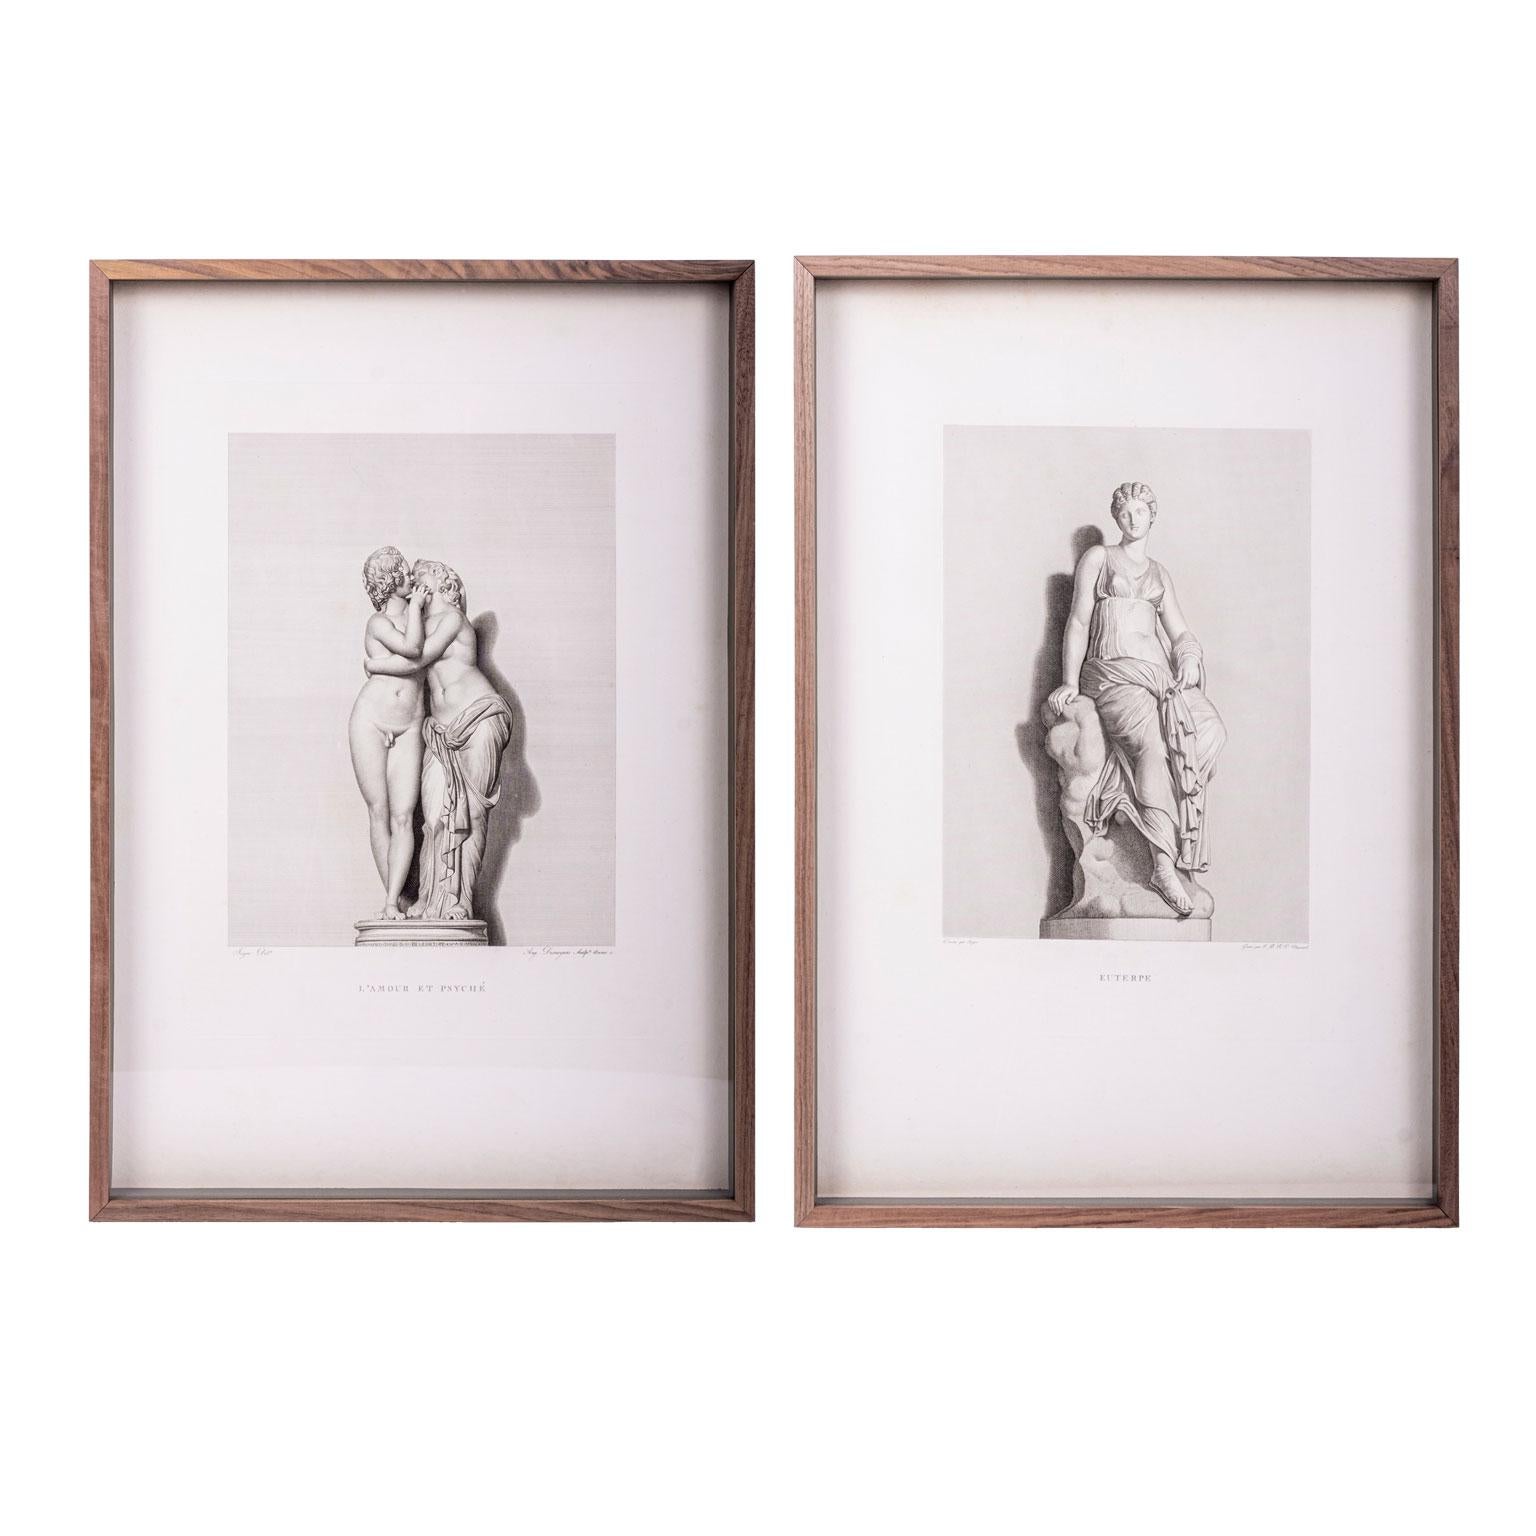 Glass Large Framed 19th Century Engravings of Classical Figures